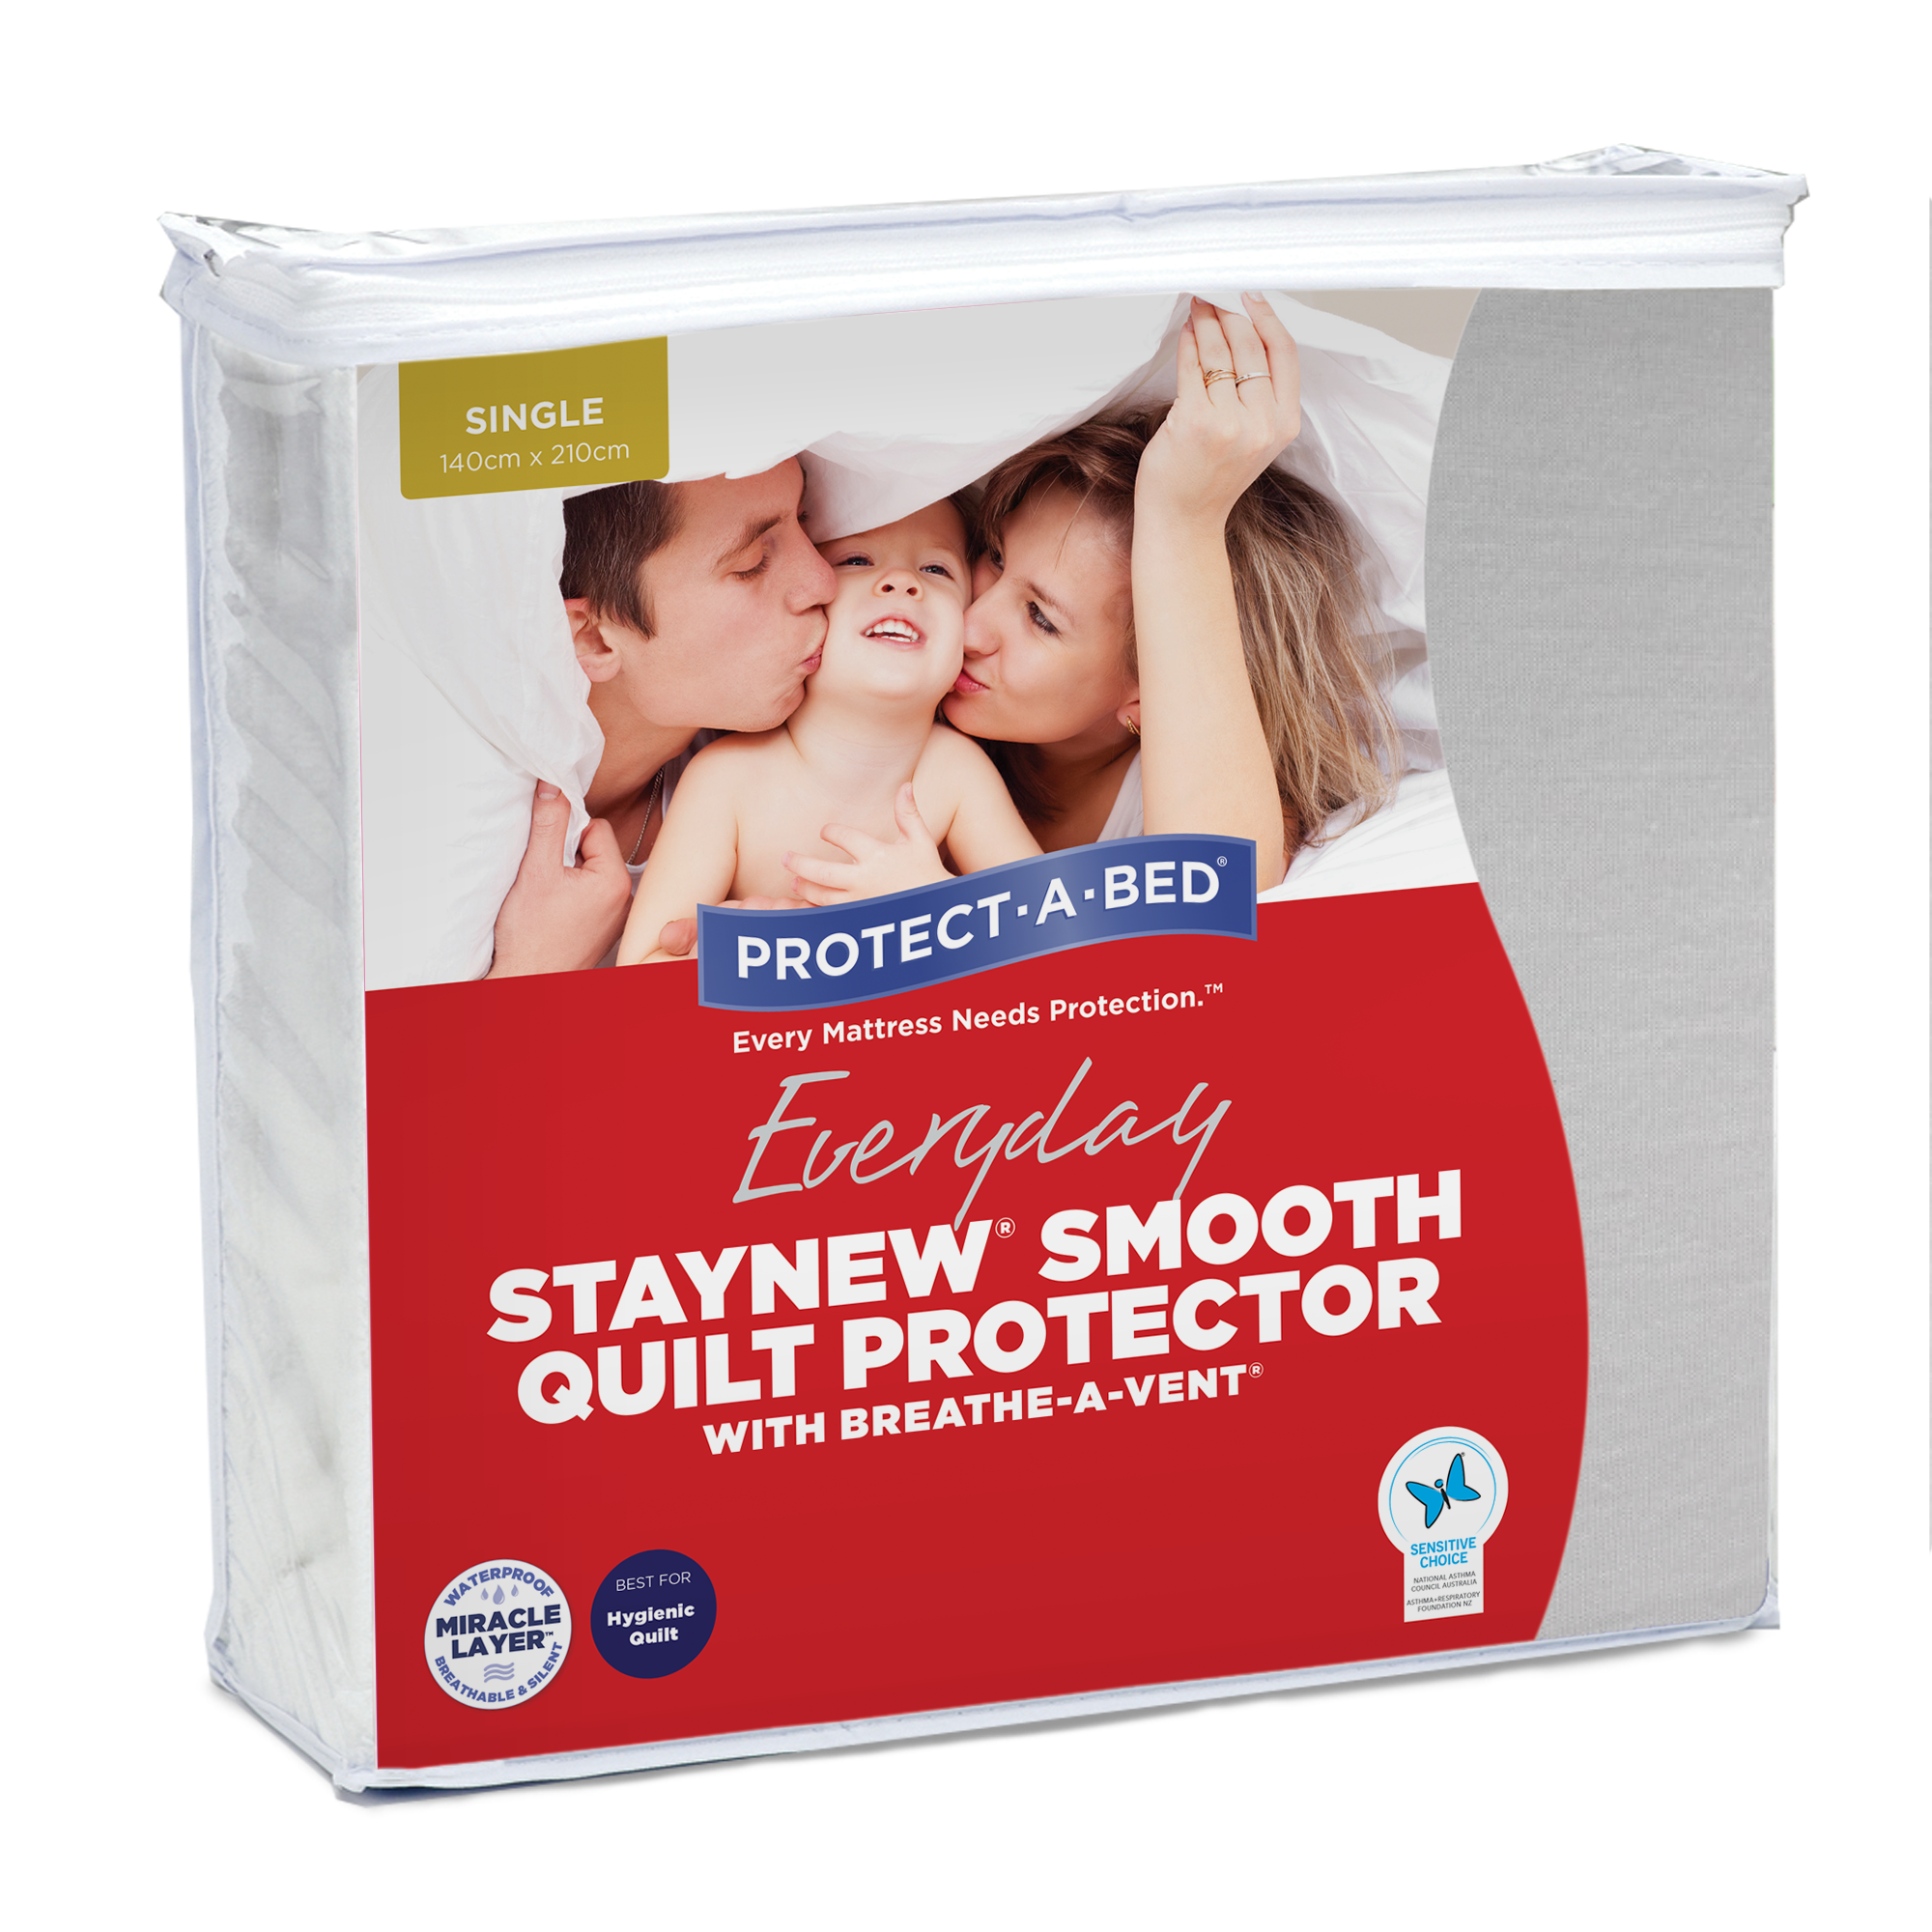 Staynew Smooth Quilt Protector Protect A Bed